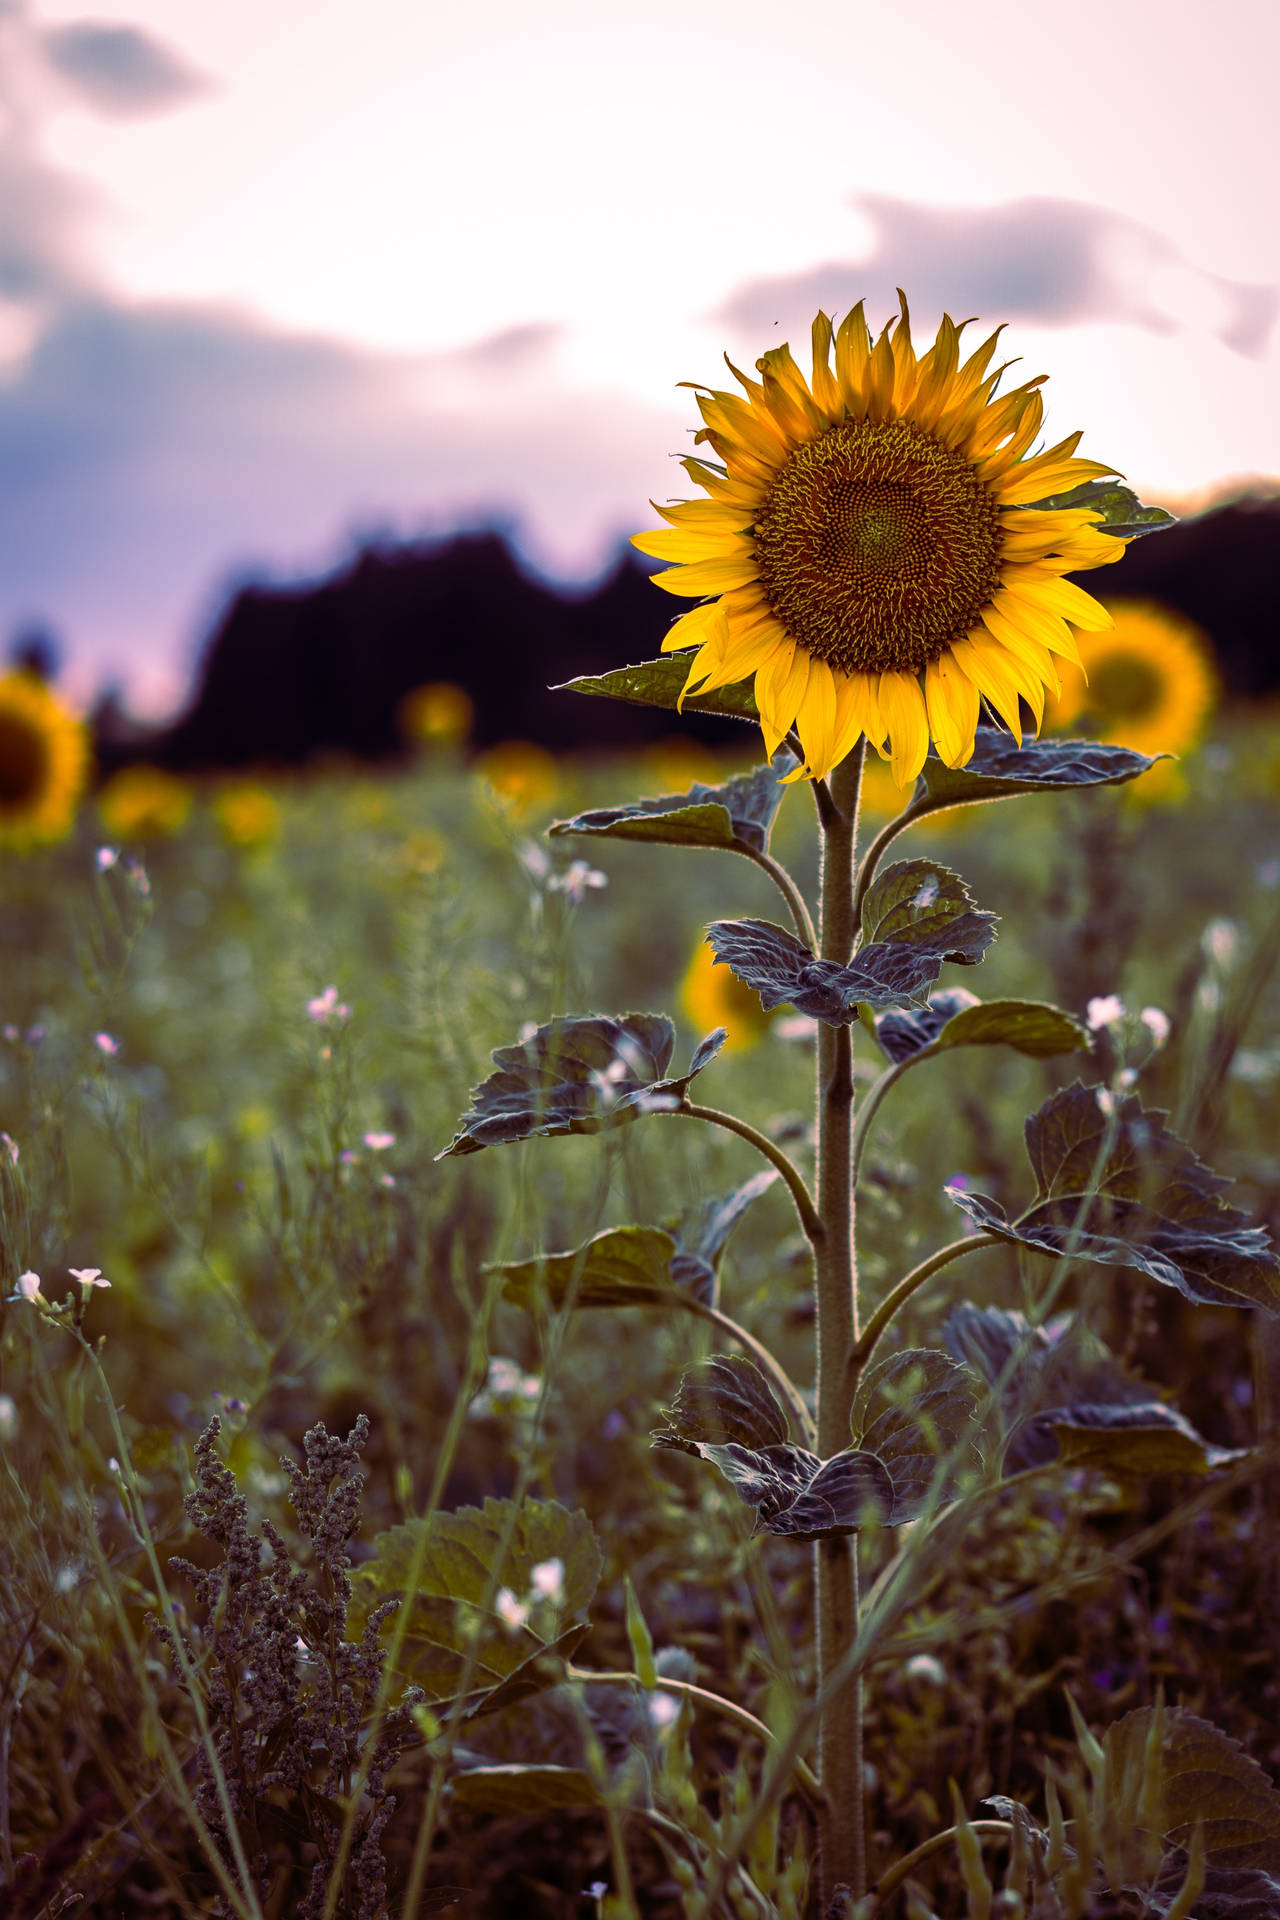 "The Beauty of Nature: Vintage Sunflowers in a Field" Wallpaper